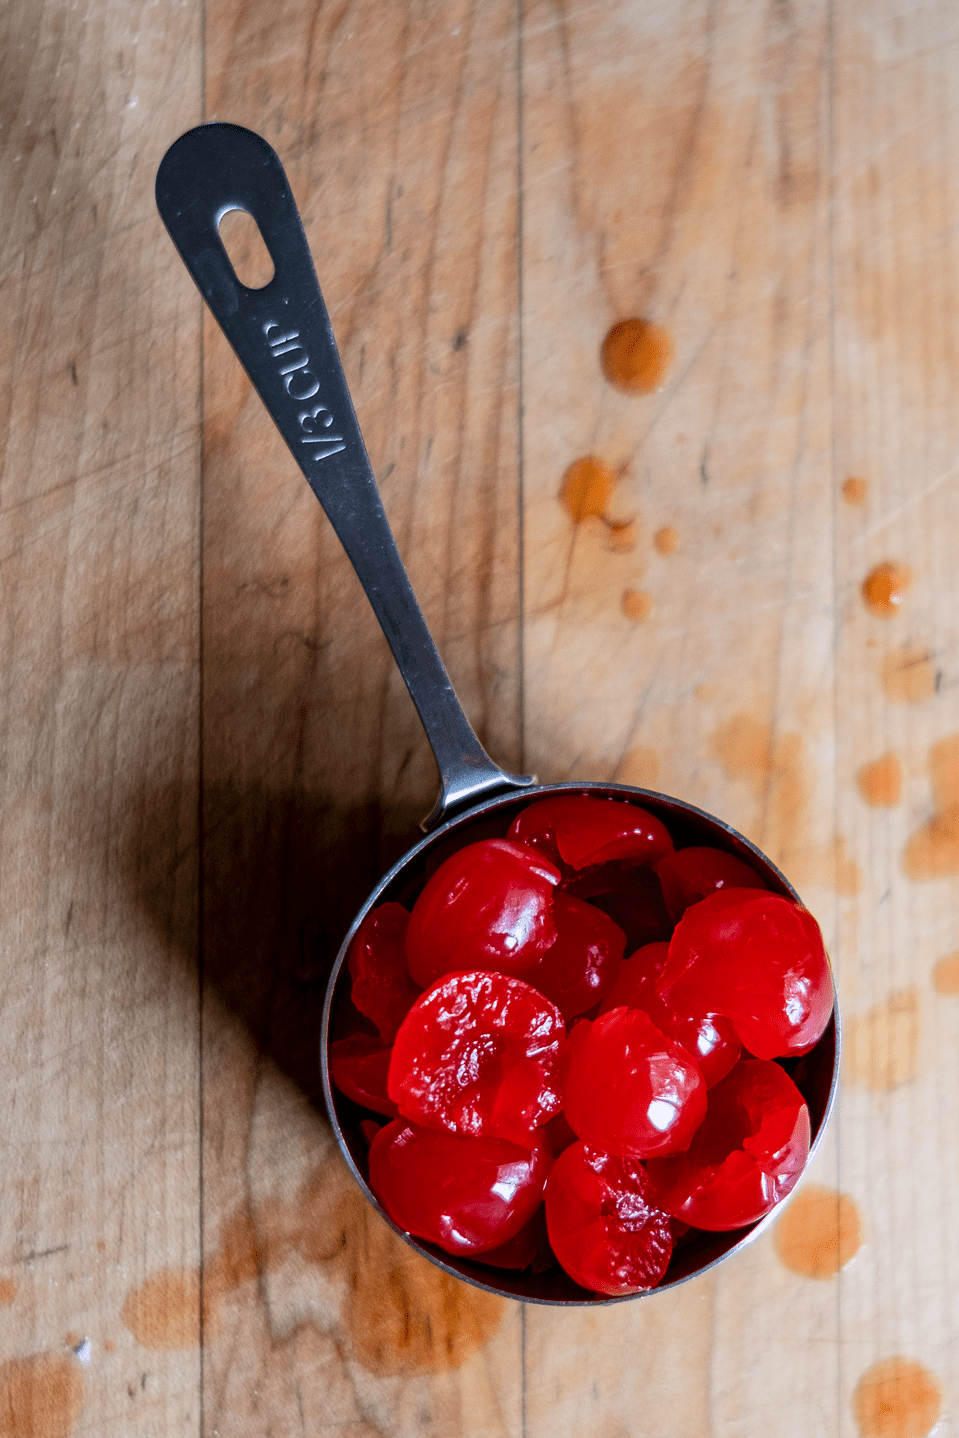 Maraschino cherries in a measuring cup.